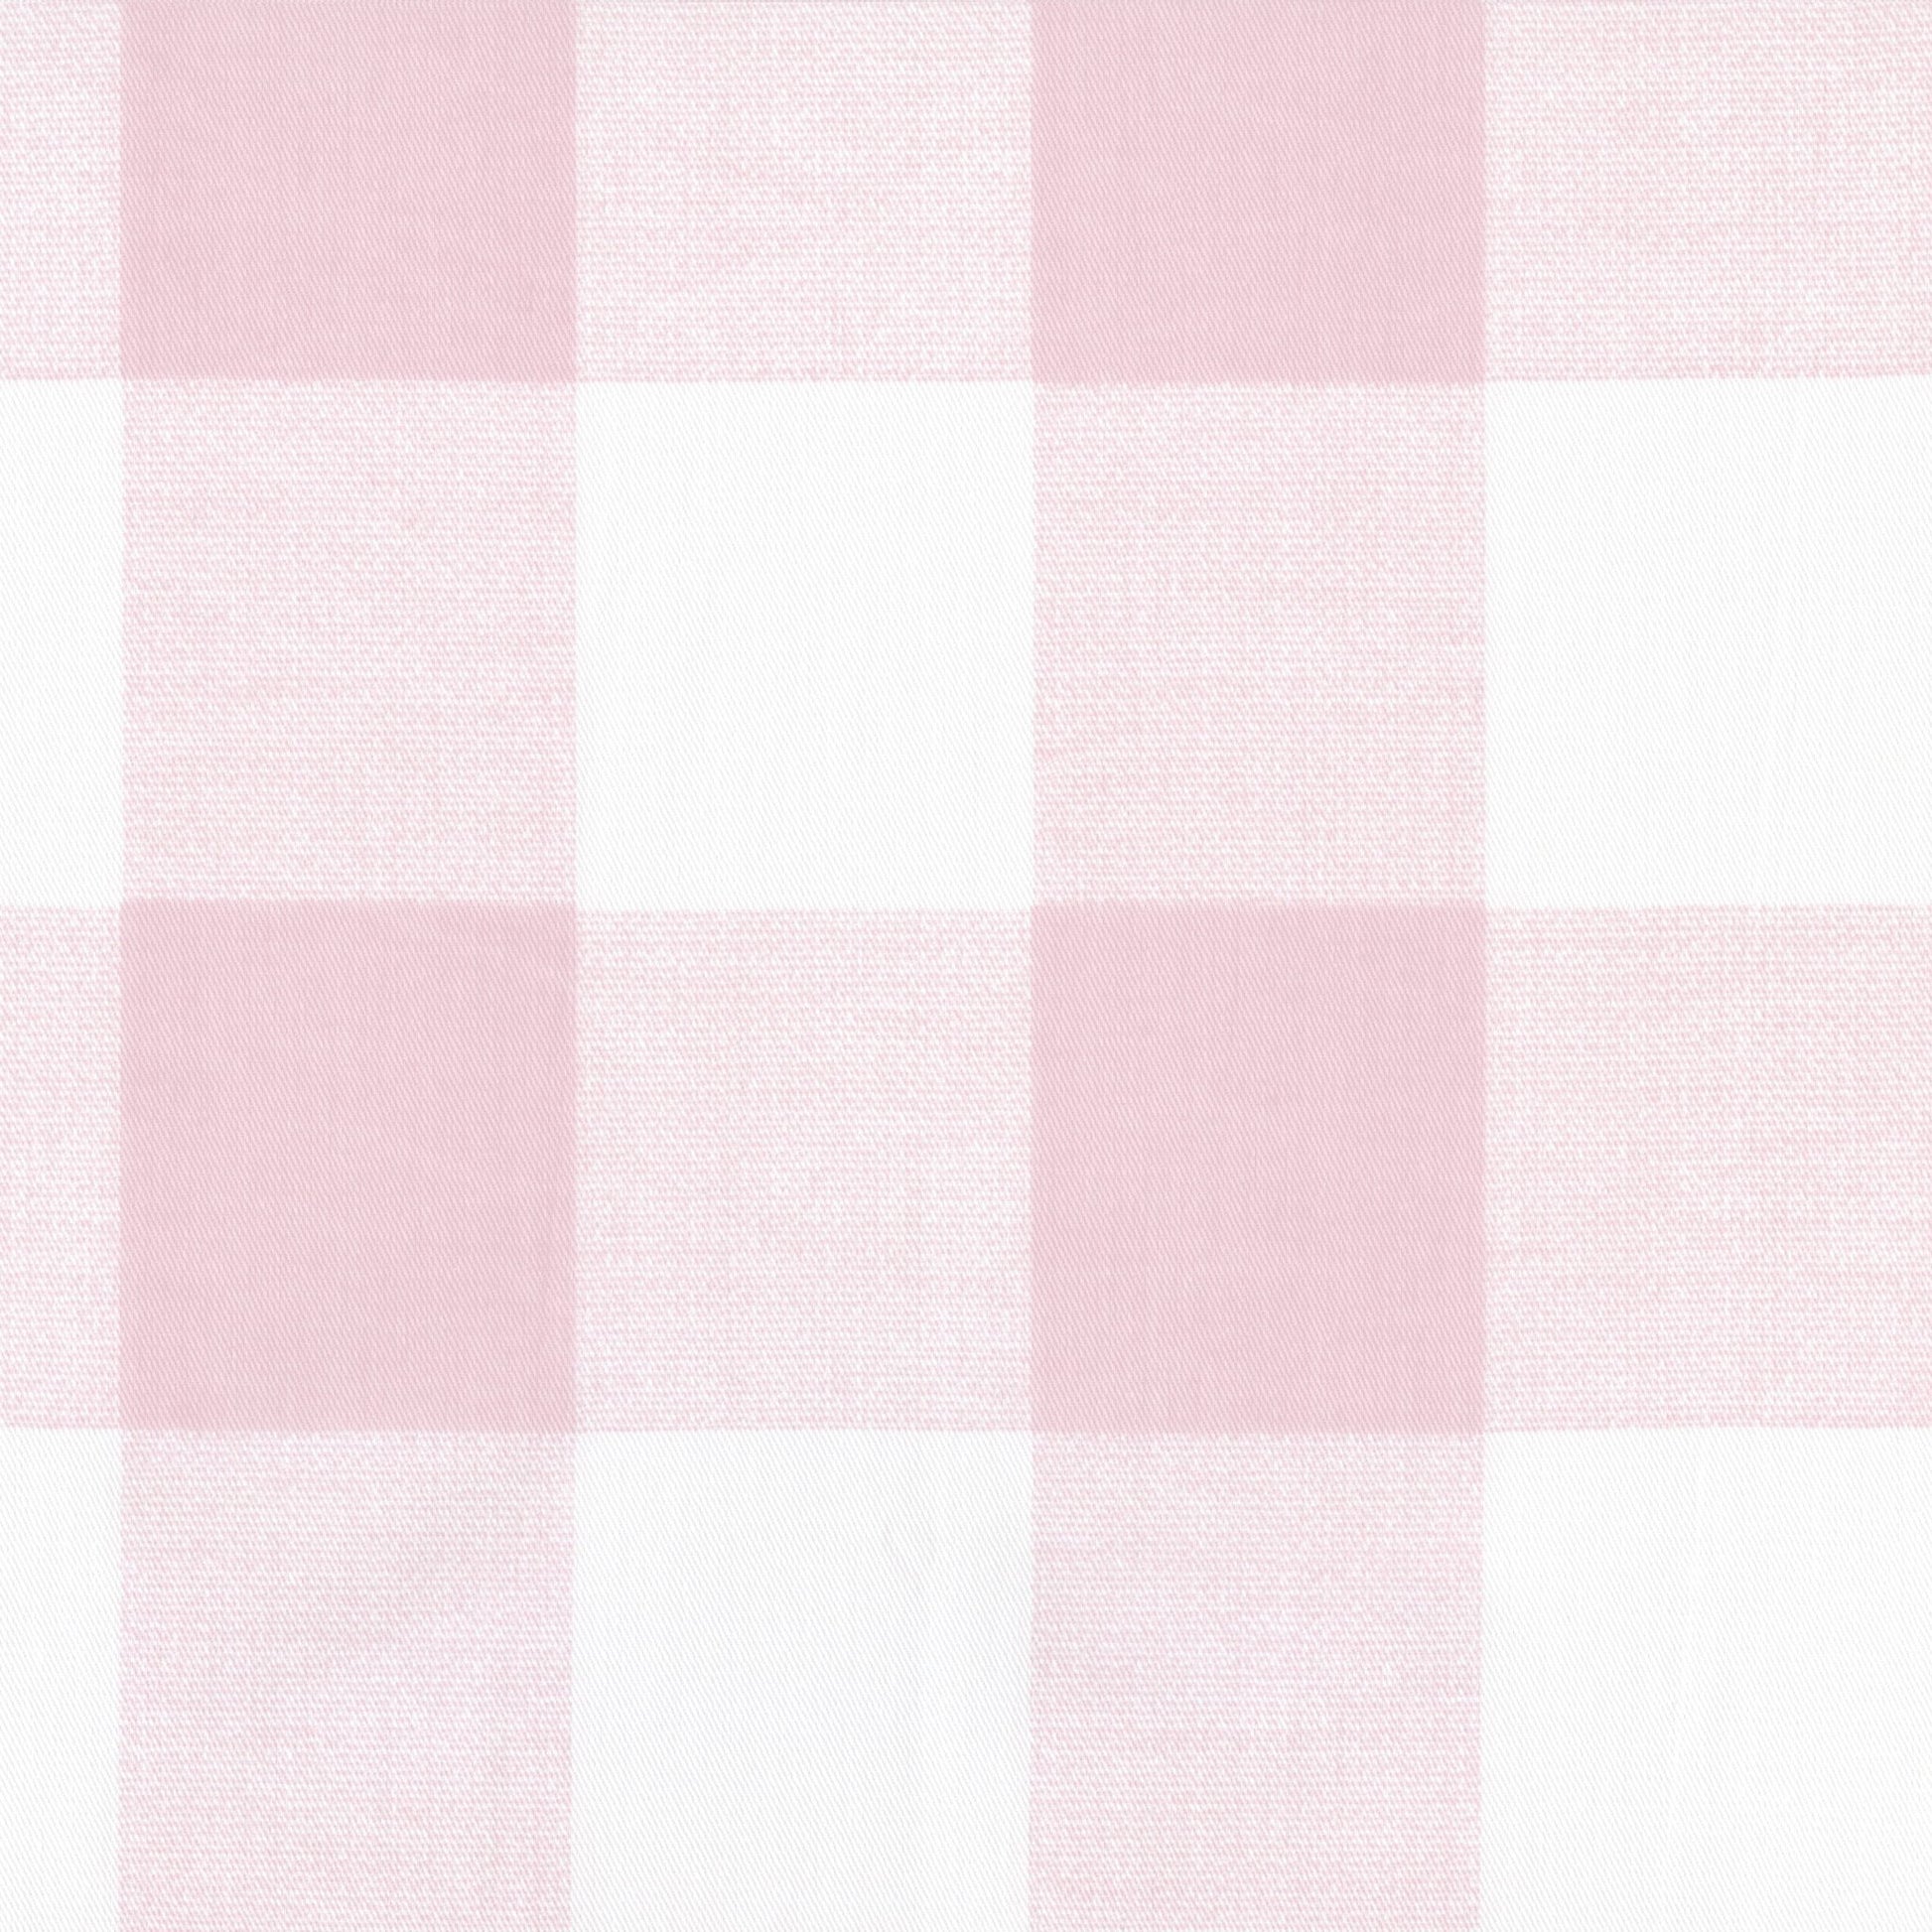 Floral and Pink Buffalo Plaid Crib Bedding Swatches - New Arrivals Inc